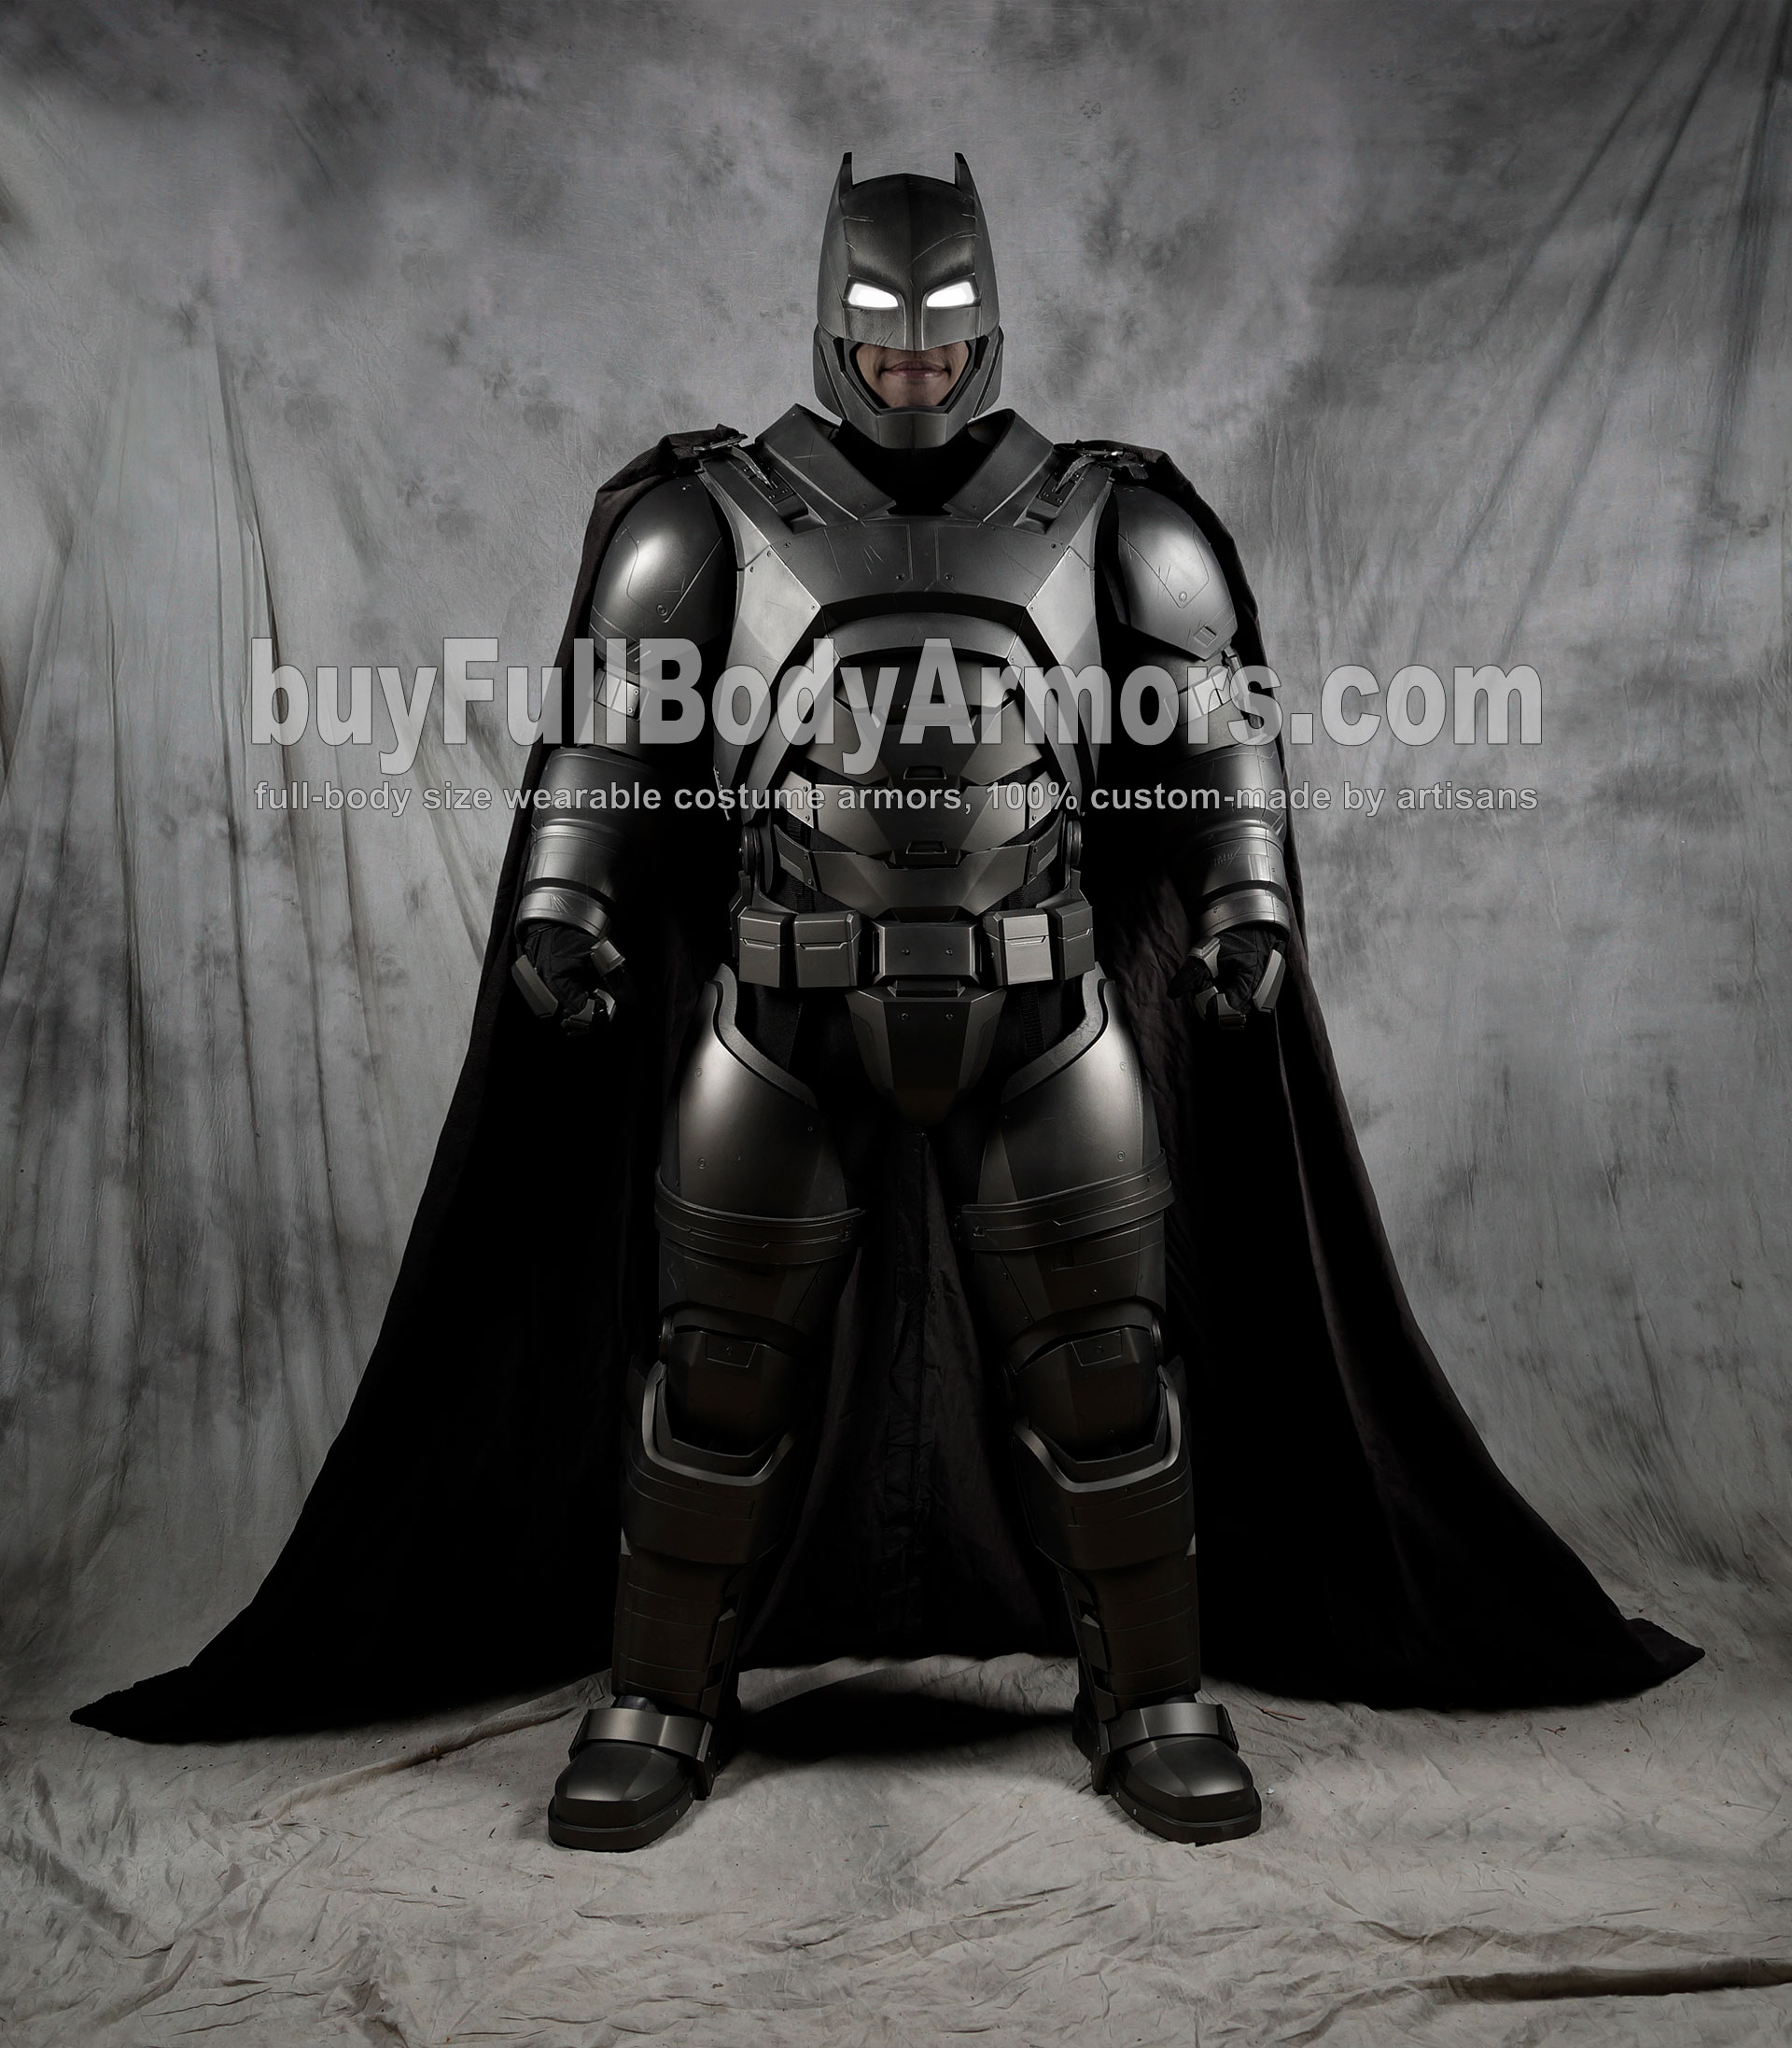 The Best Batsuits / Batman Costumes of All Time